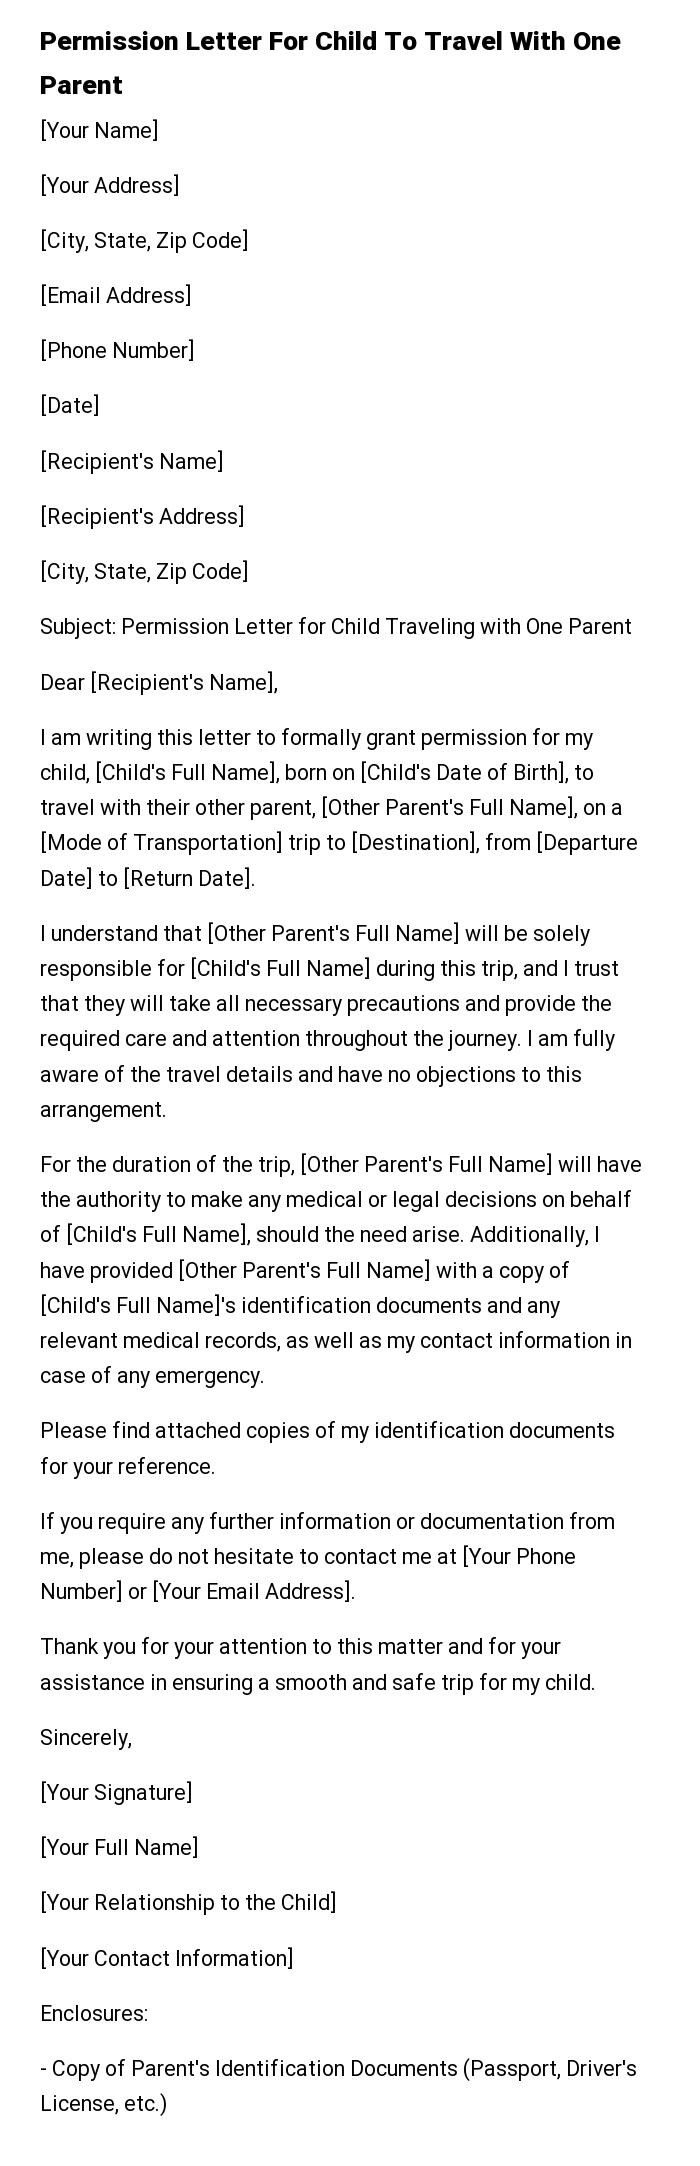 Permission Letter For Child To Travel With One Parent